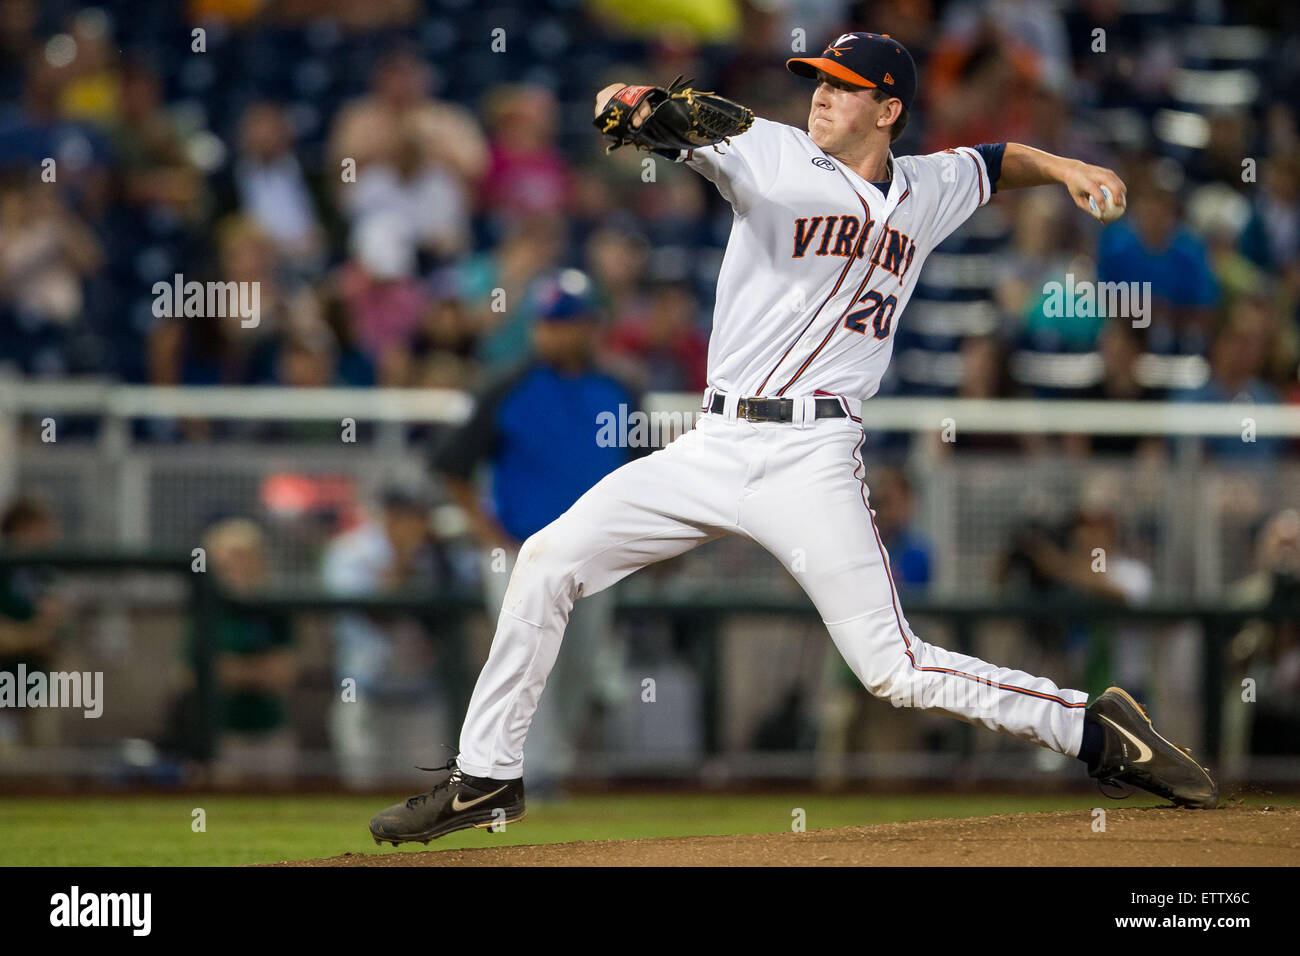 Omaha, NE, USA. 15th June, 2015. Virginia pitcher Brandon Waddell #20 in action during game 6 of the 2015 NCAA Men's College World Series between the Virginia Cavaliers and Florida Gators at TD Ameritrade Park in Omaha, NE.Nathan Olsen/Cal Sport Media/Alamy Live News Stock Photo